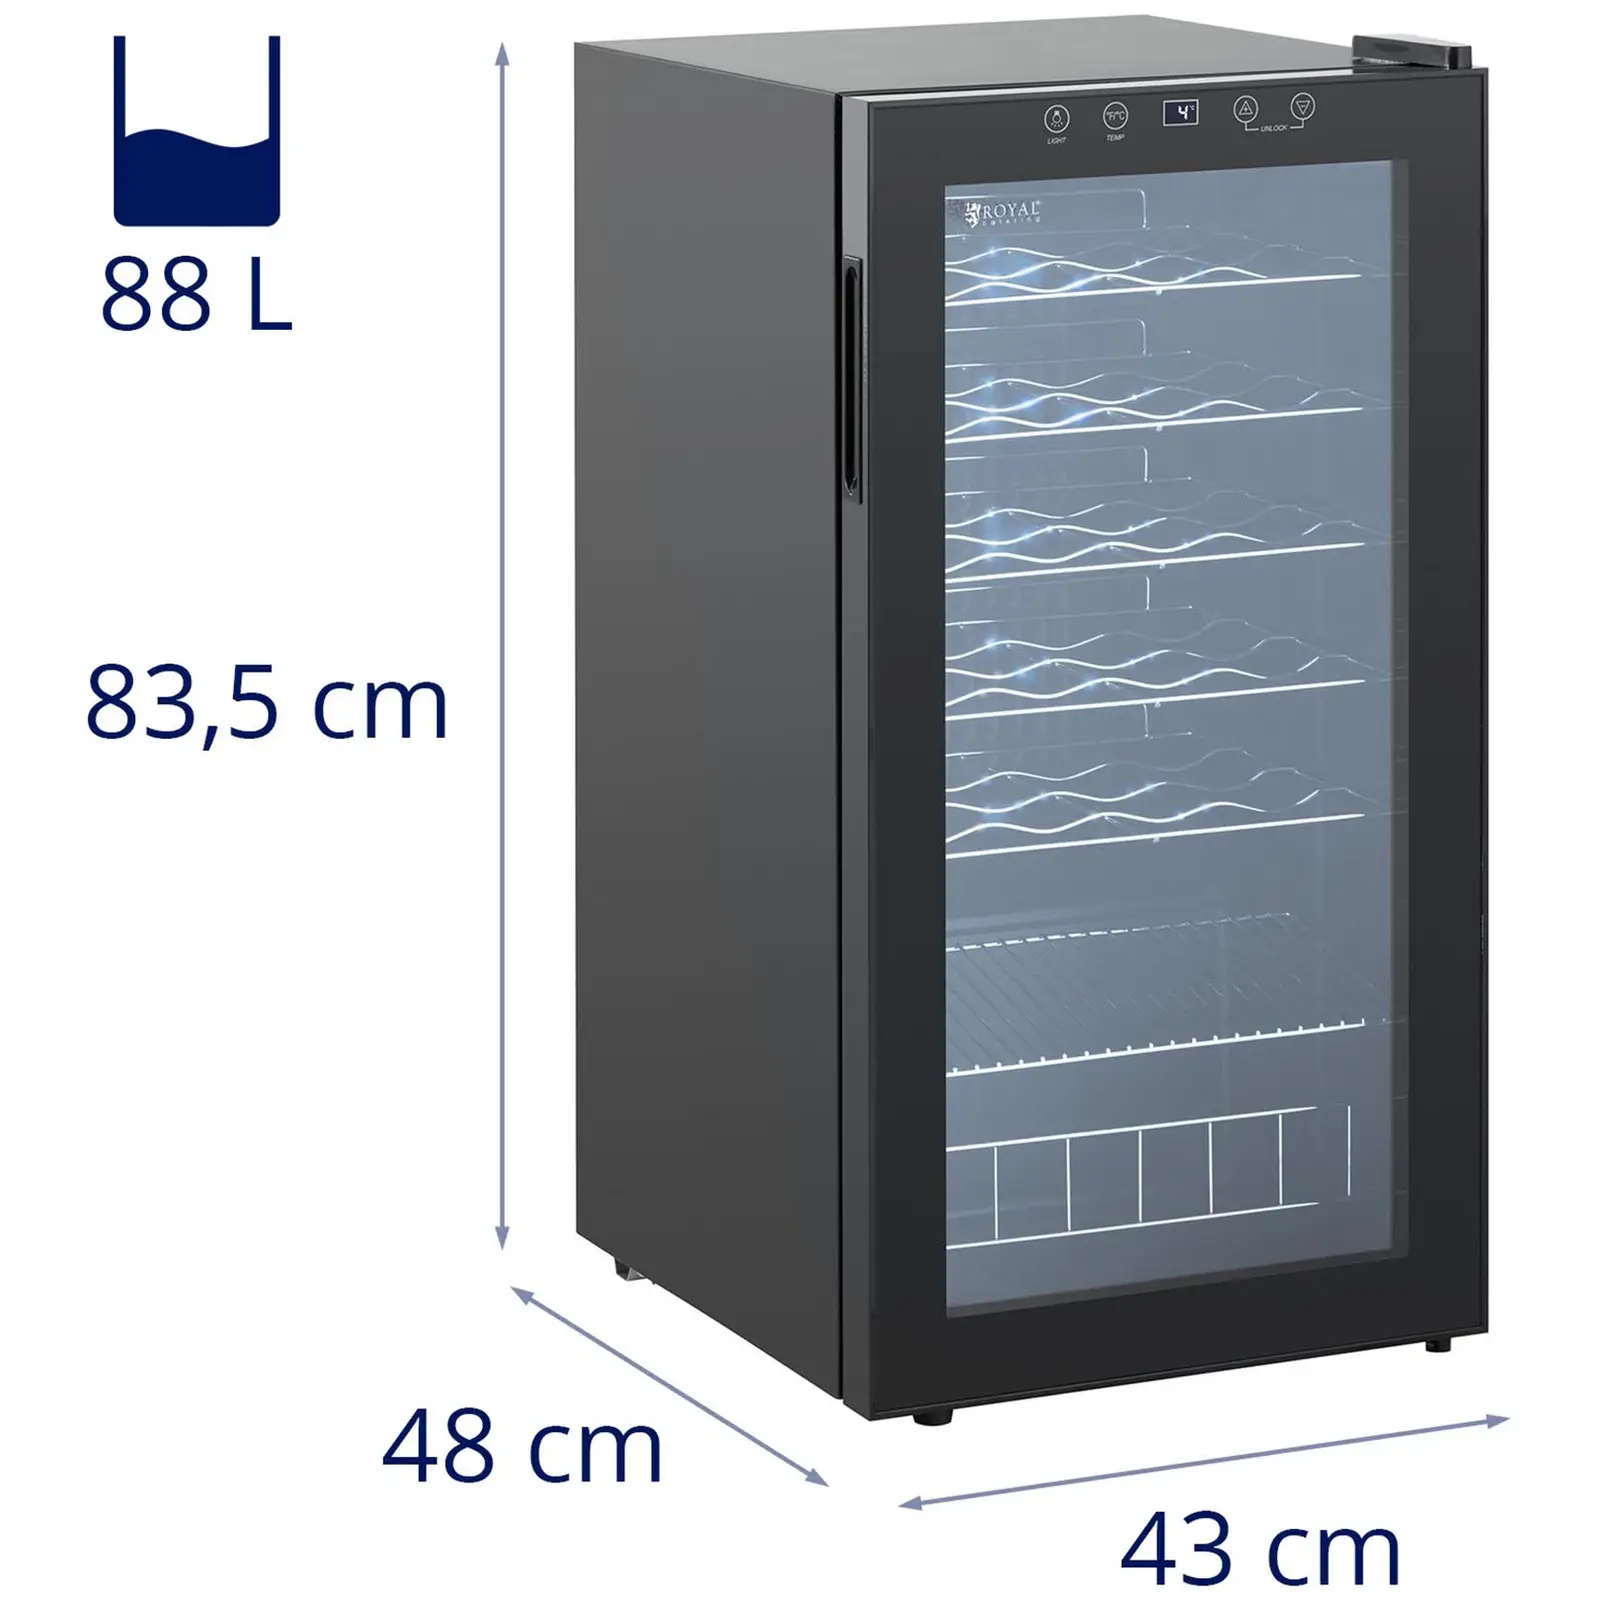 Wine Cooler - 88 l - Royal Catering - powder-coated steel - 7